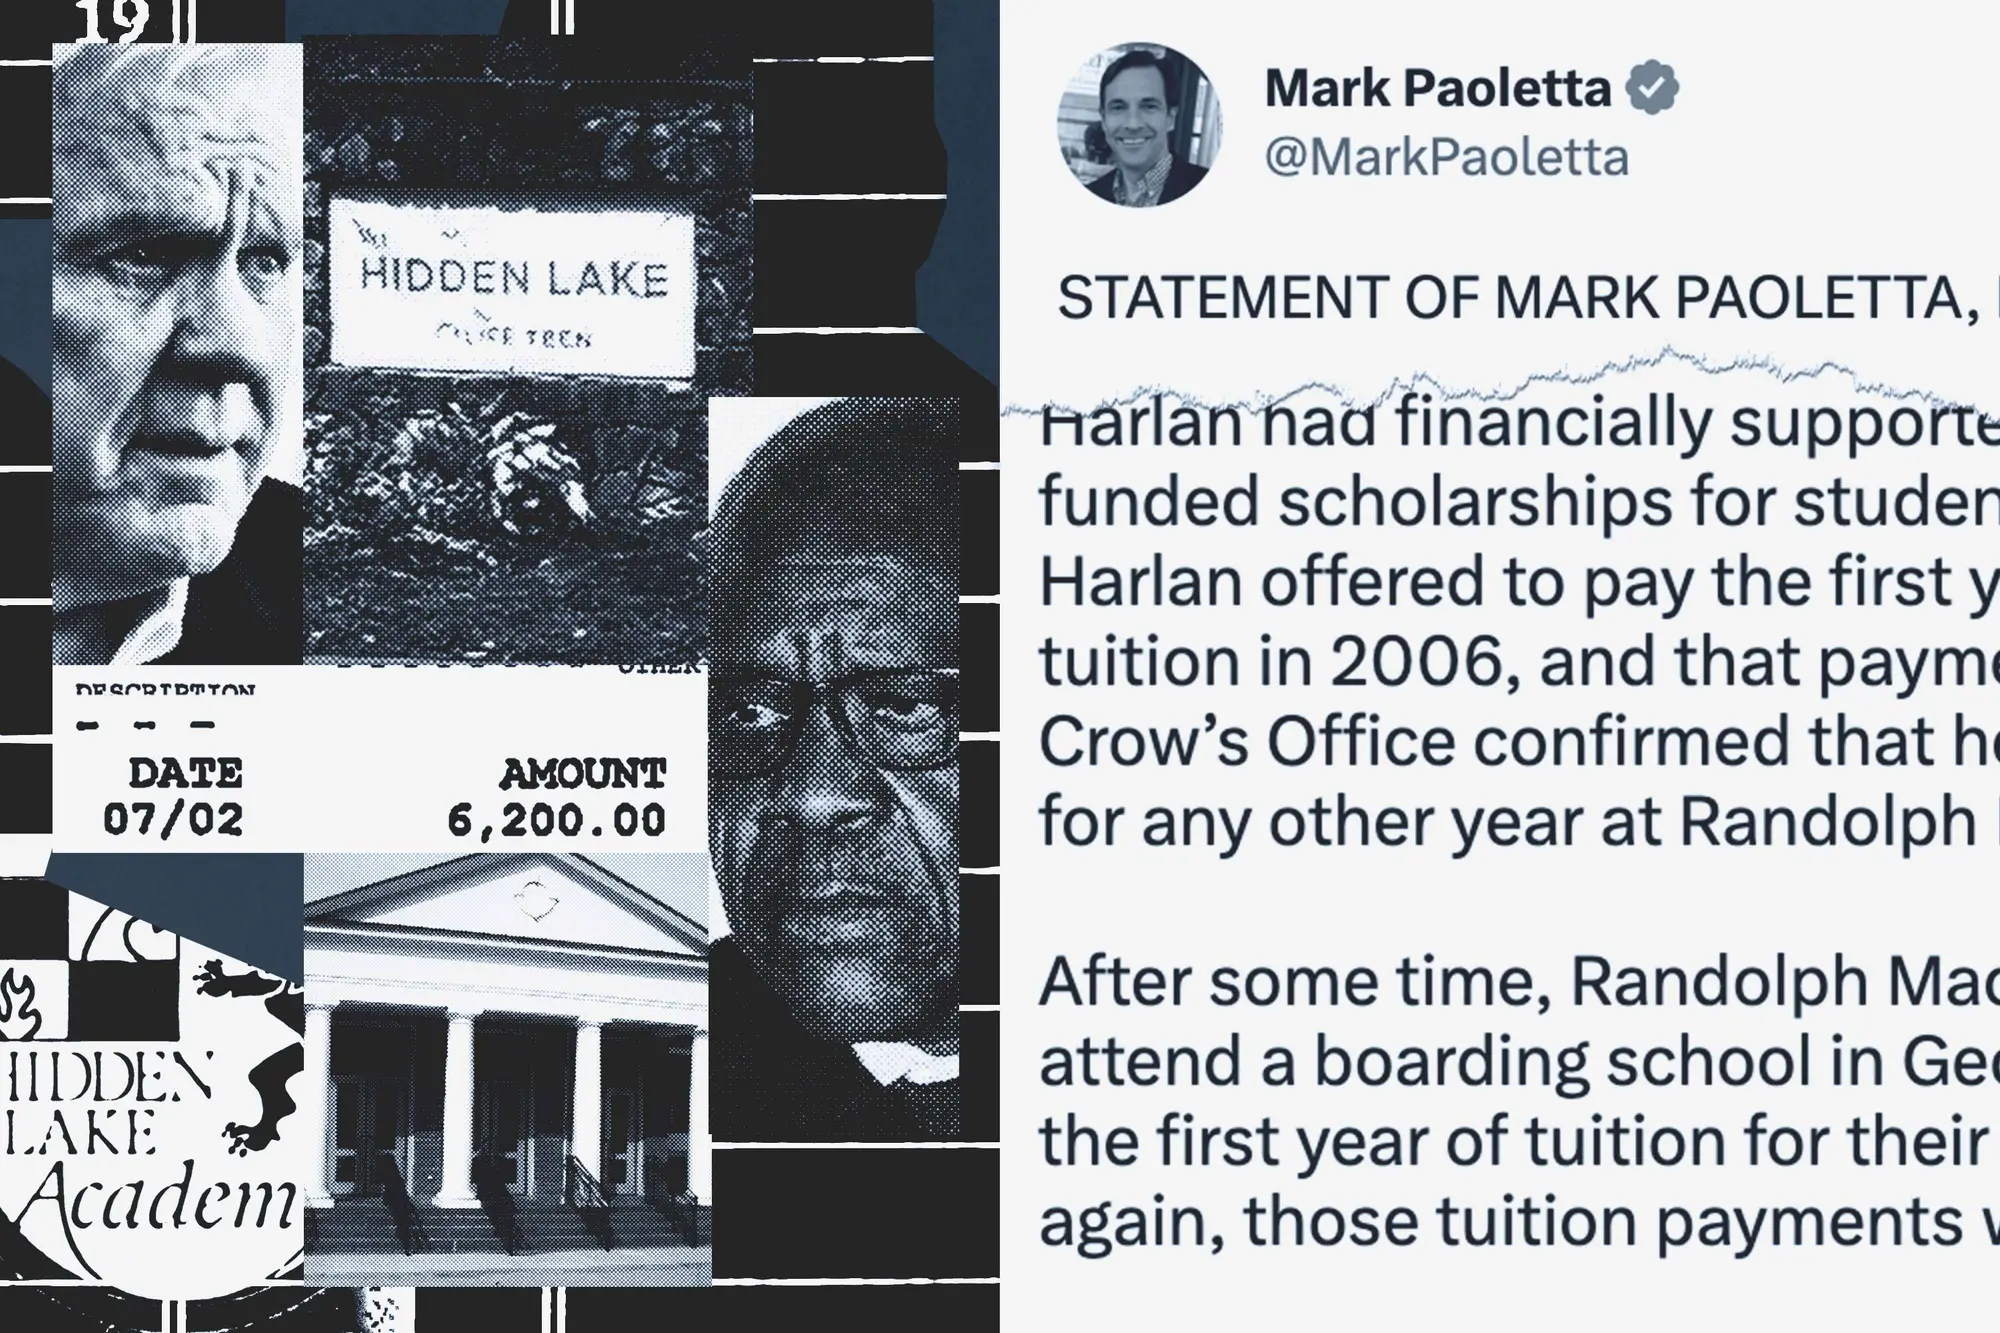 Clarence Thomas’ Friend Acknowledges That Billionaire Harlan Crow Paid Tuition for the Child Thomas Was Raising ‘as a Son’ (propublica.org)